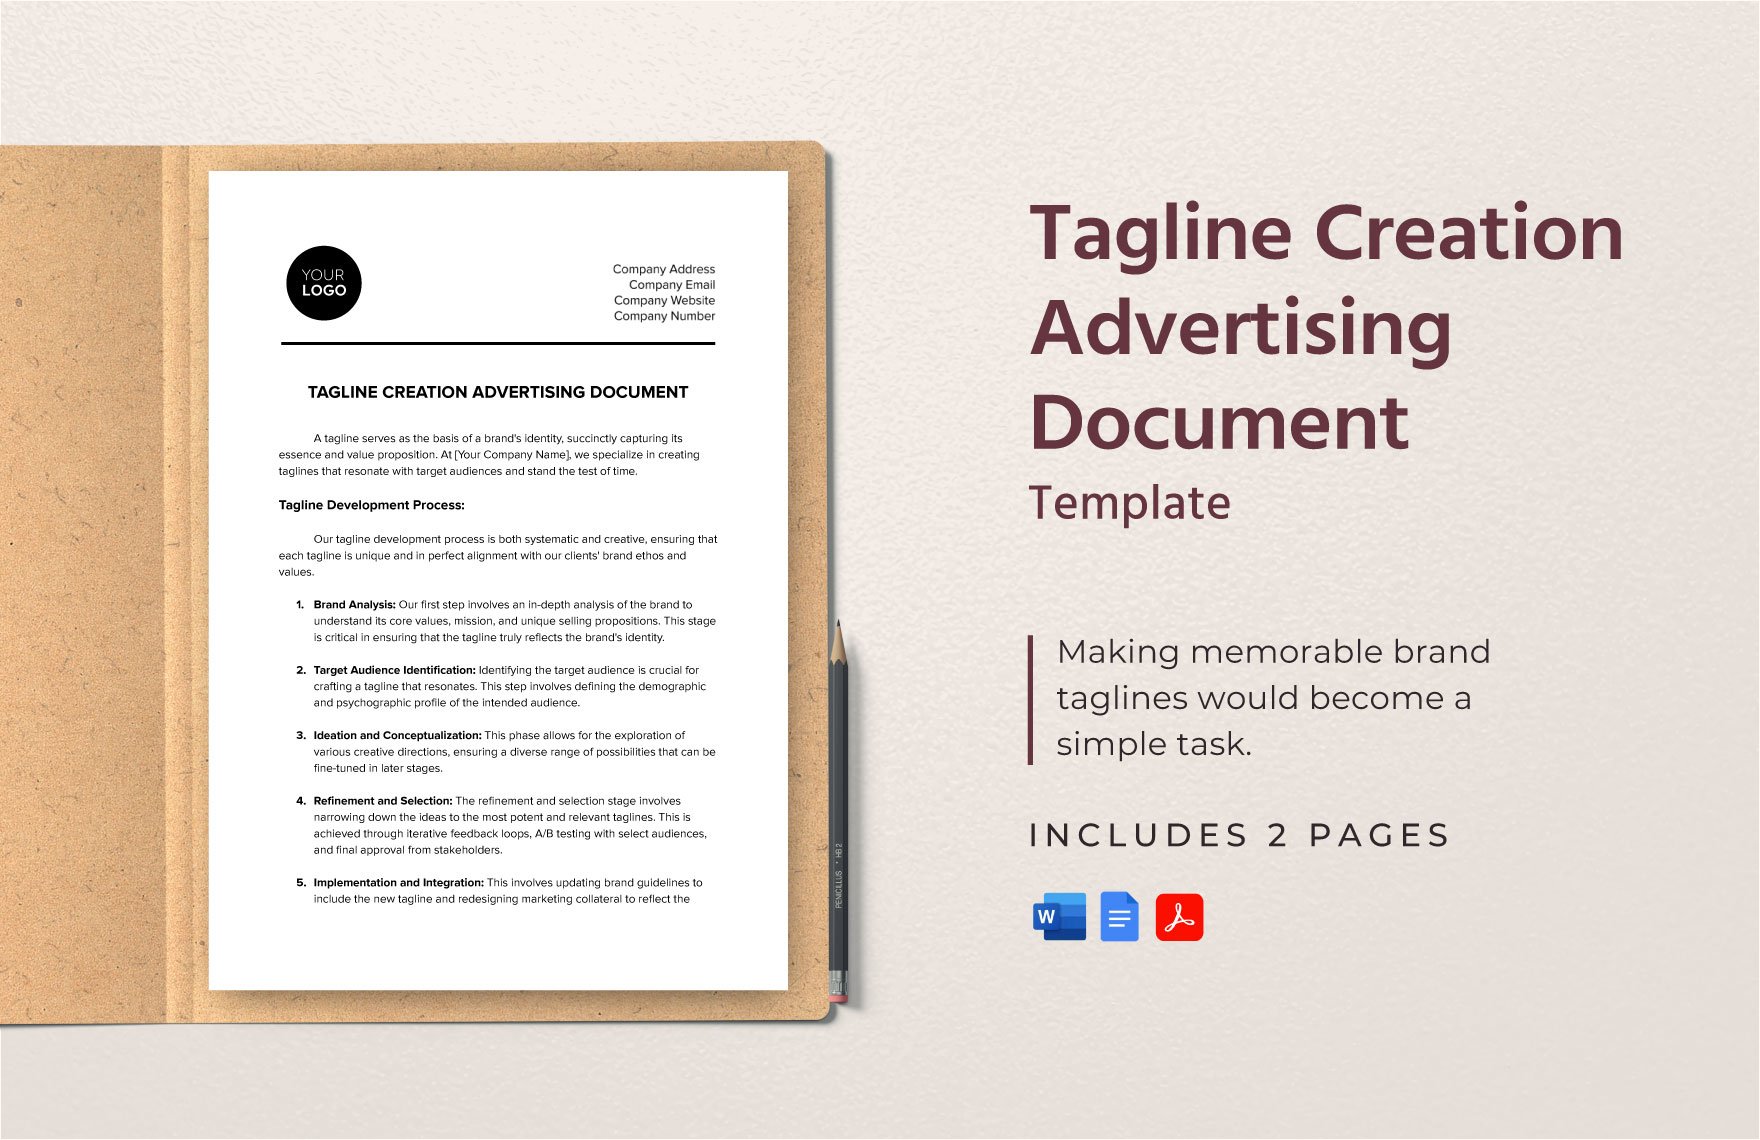 Tagline Creation Advertising Document Template in Word, Google Docs, PDF